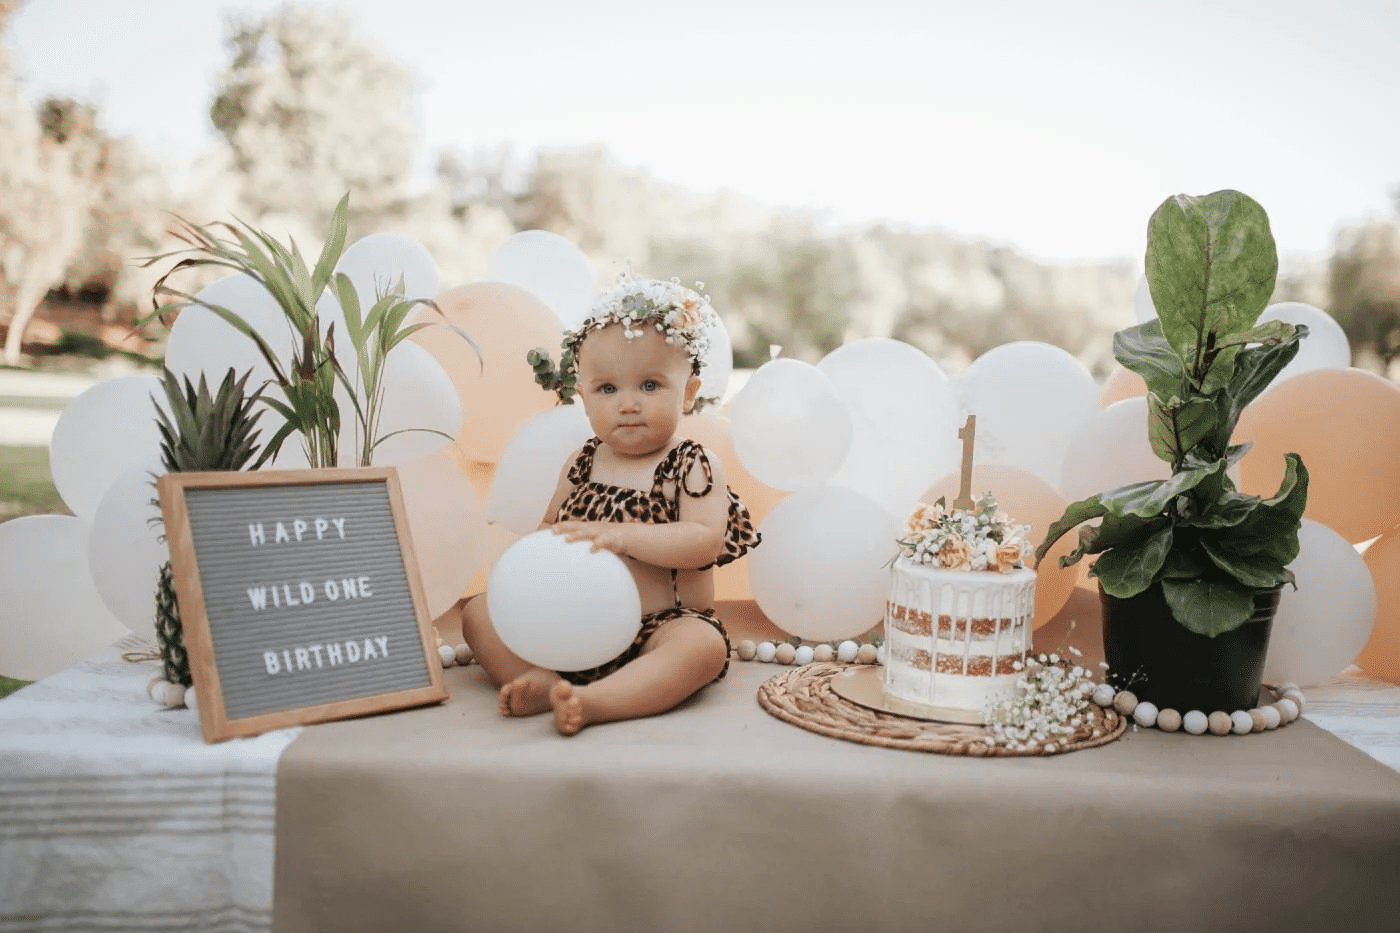 A baby girl's jungle birthday party with a cake and numbers